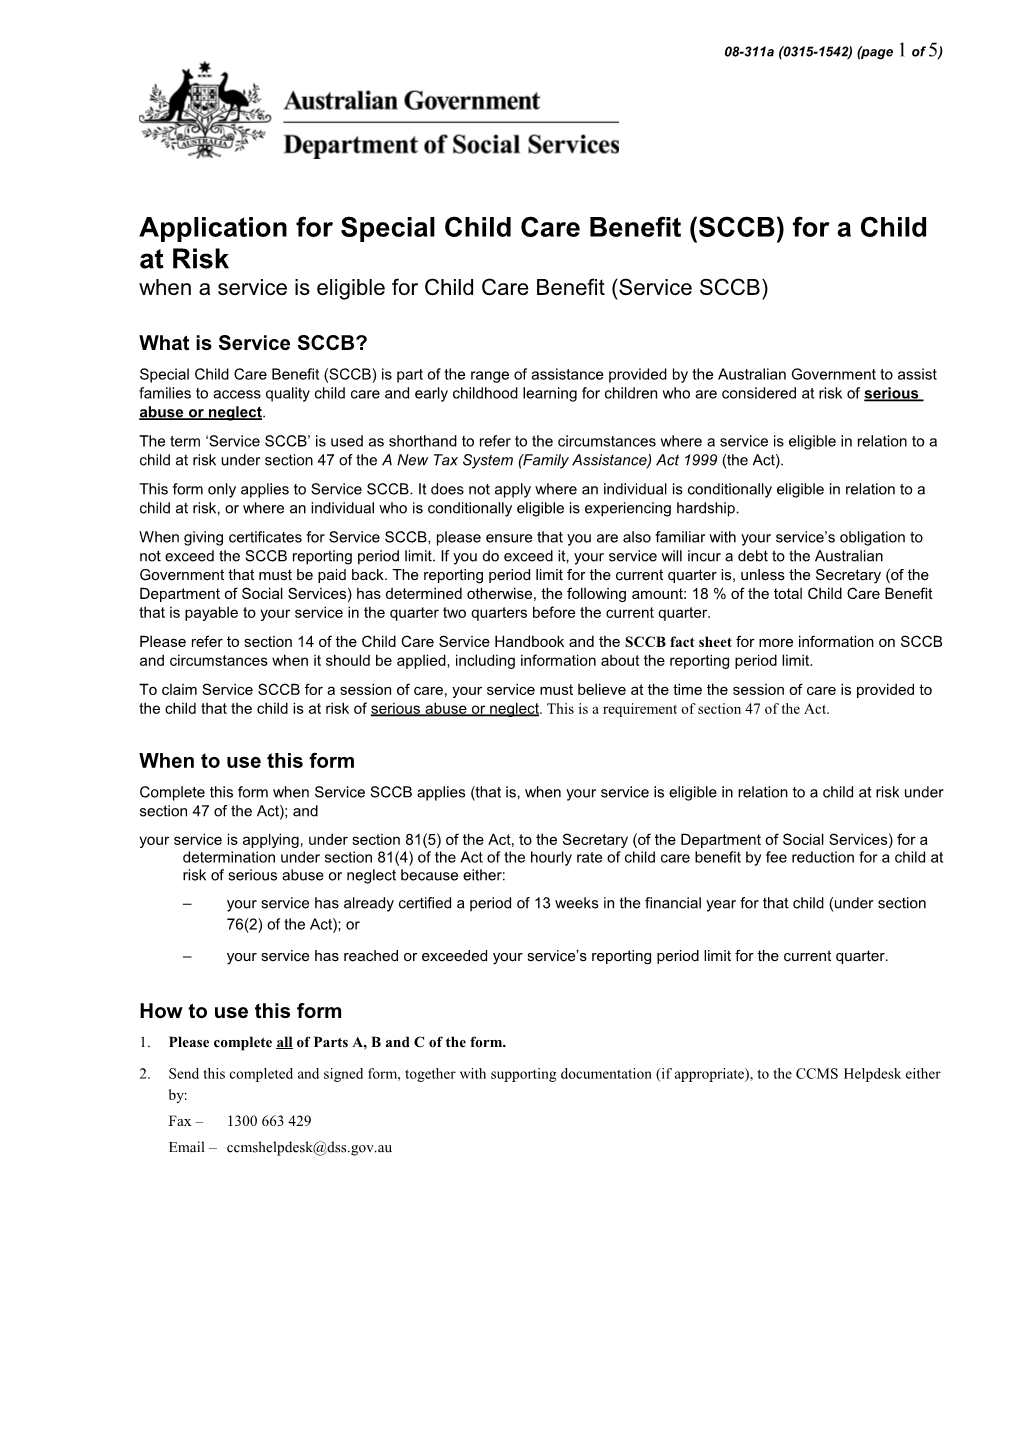 Application for Special Child Care Benefit (SCCB) for a Child at Risk